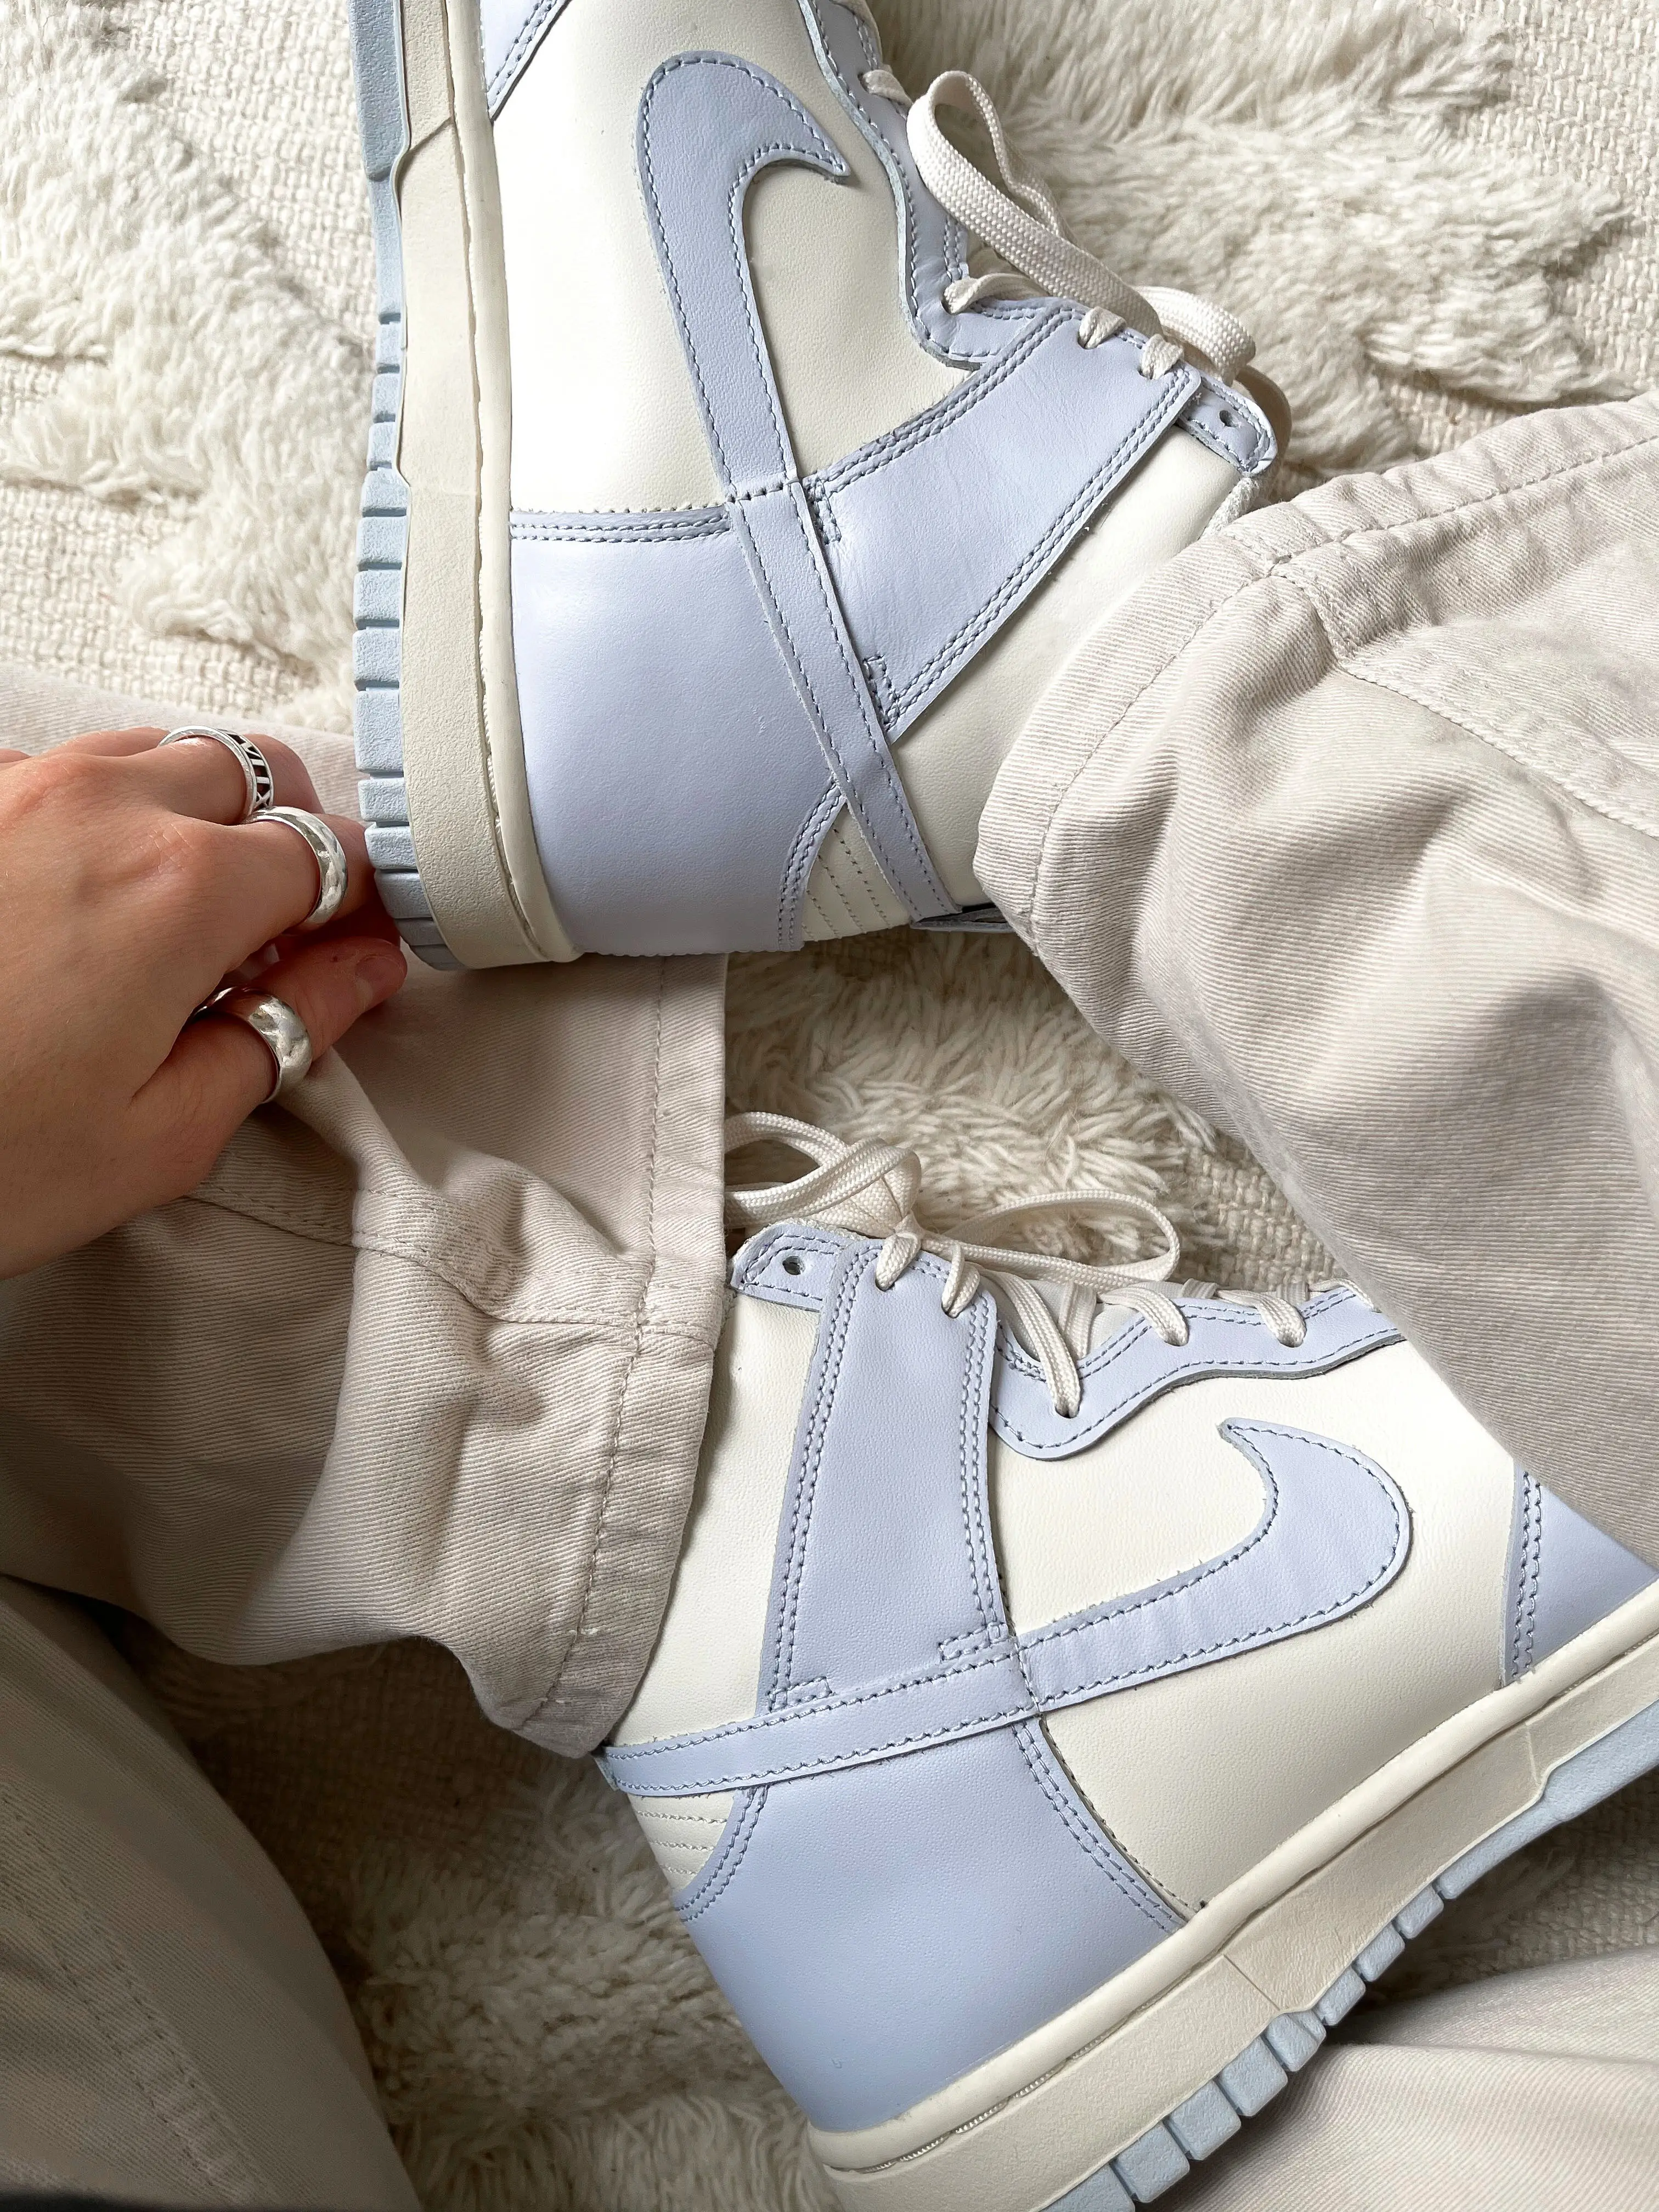 Outfit Inspiration: How To Style The Nike Dunk High 'Football Grey ...